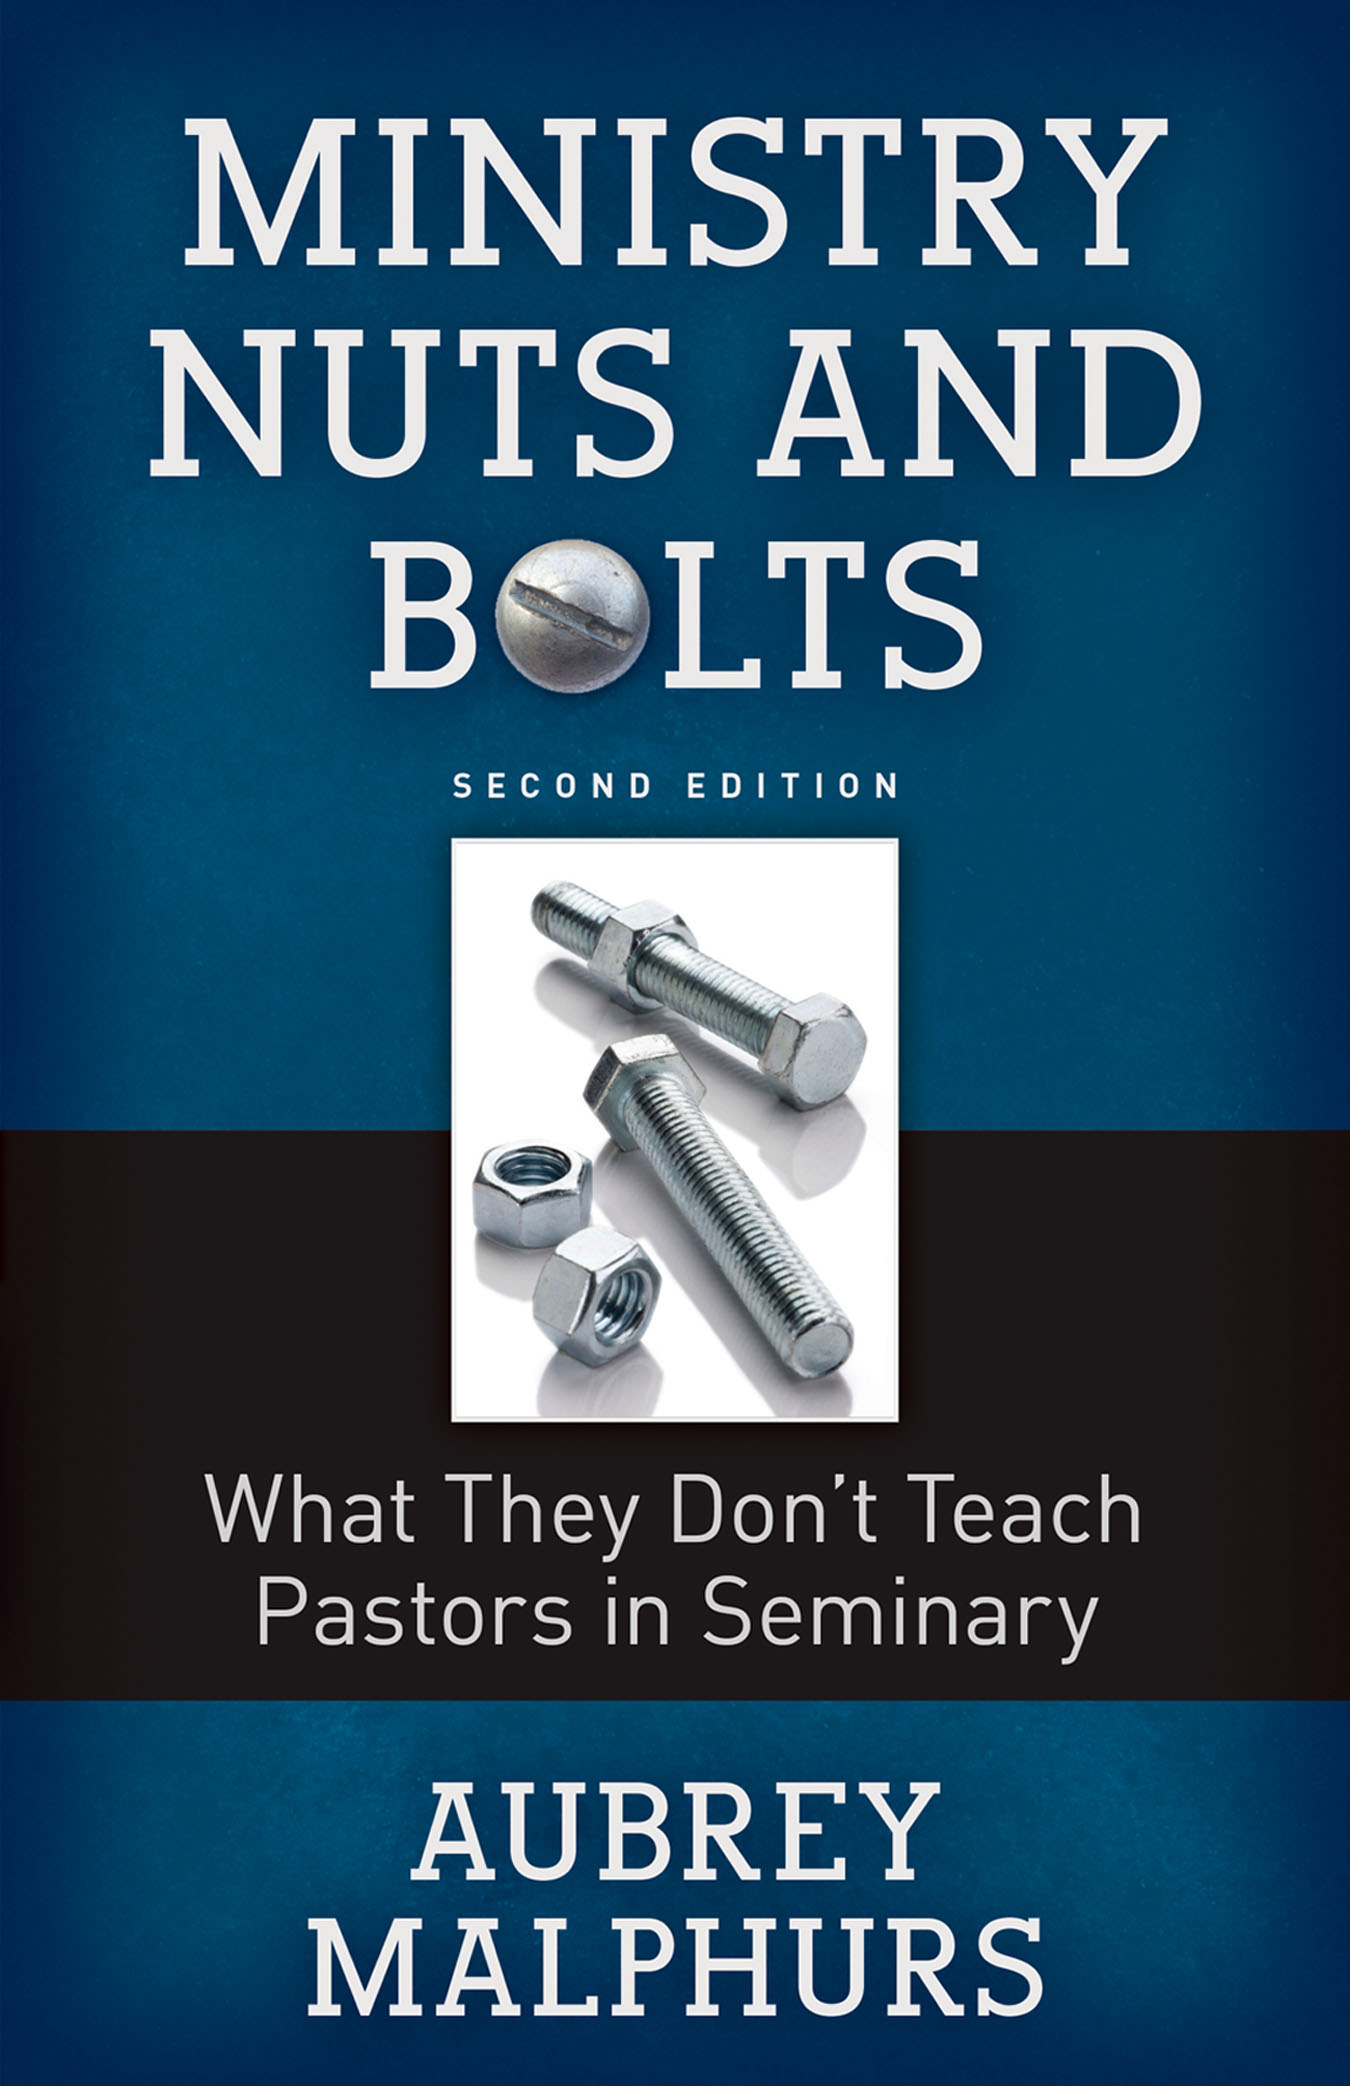 Ministry Nuts and Bolts, Second Edition